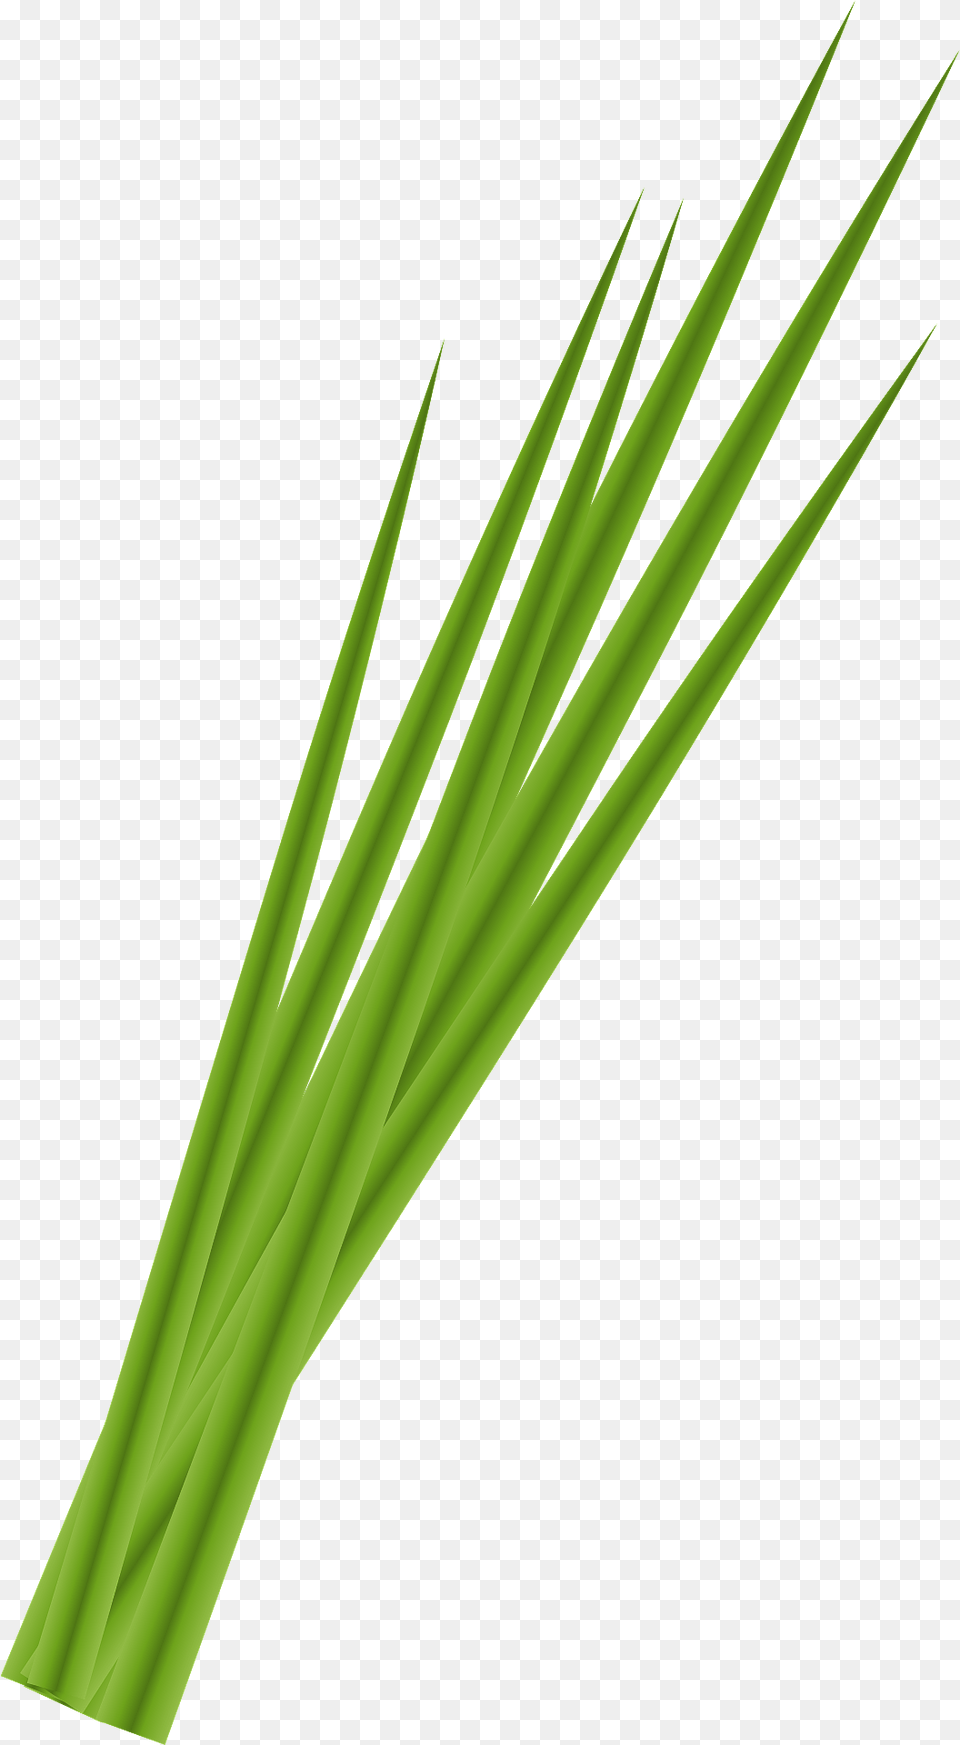 Garlic Chives Clipart, Grass, Plant, Green, Food Png